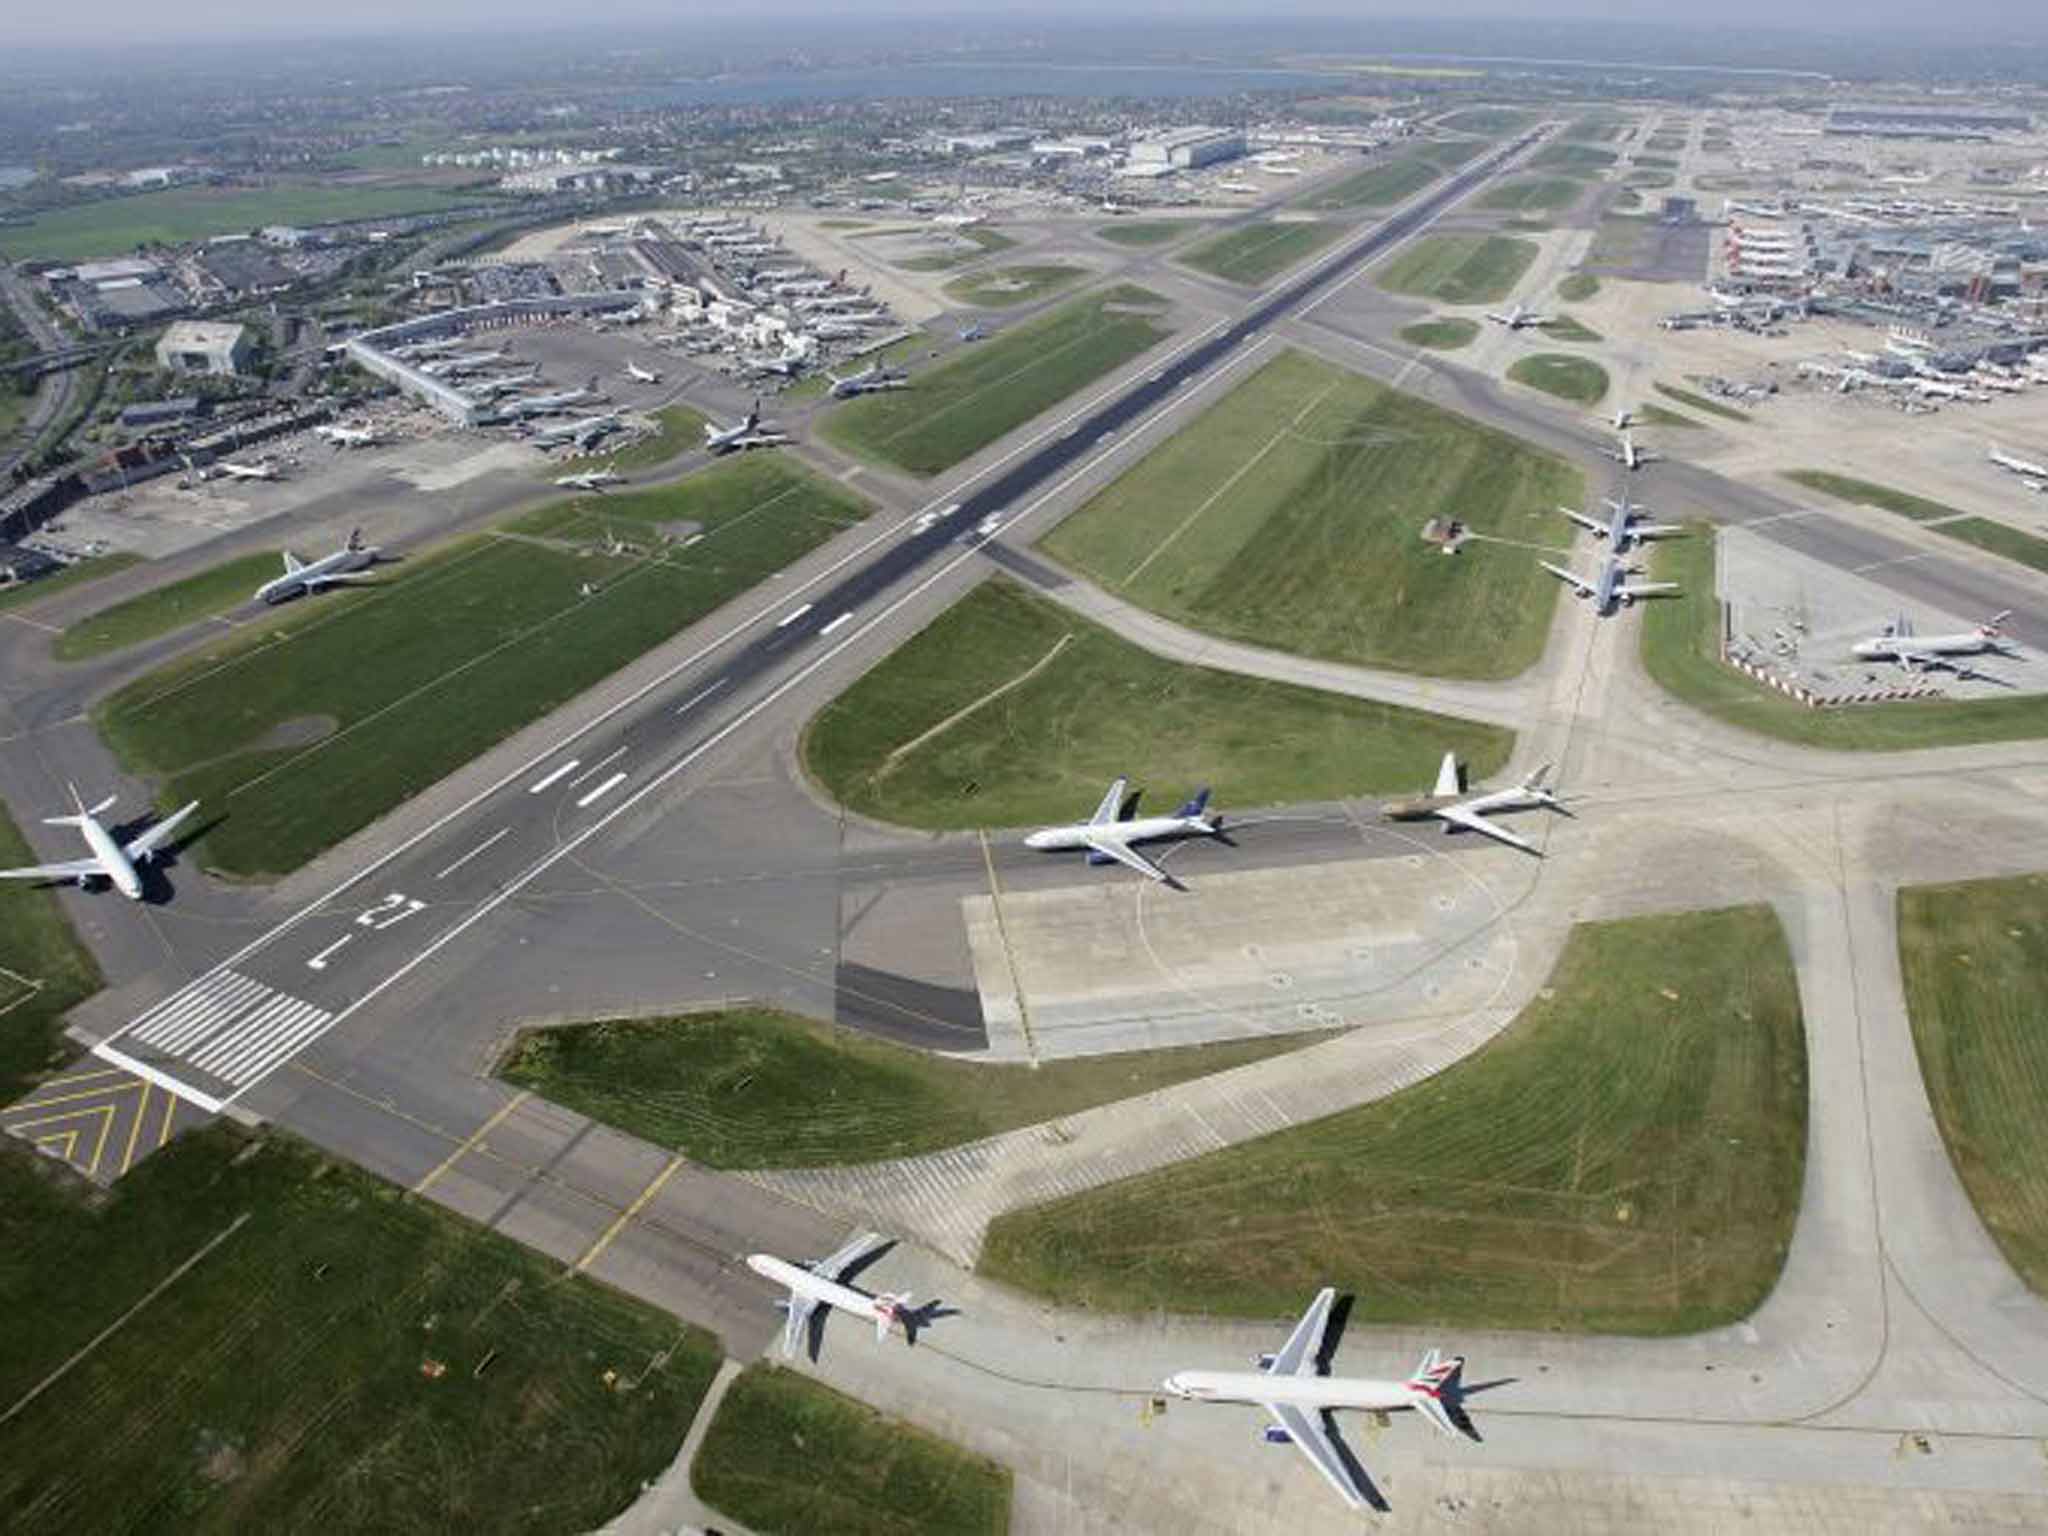 Planes queuing at Heathrow